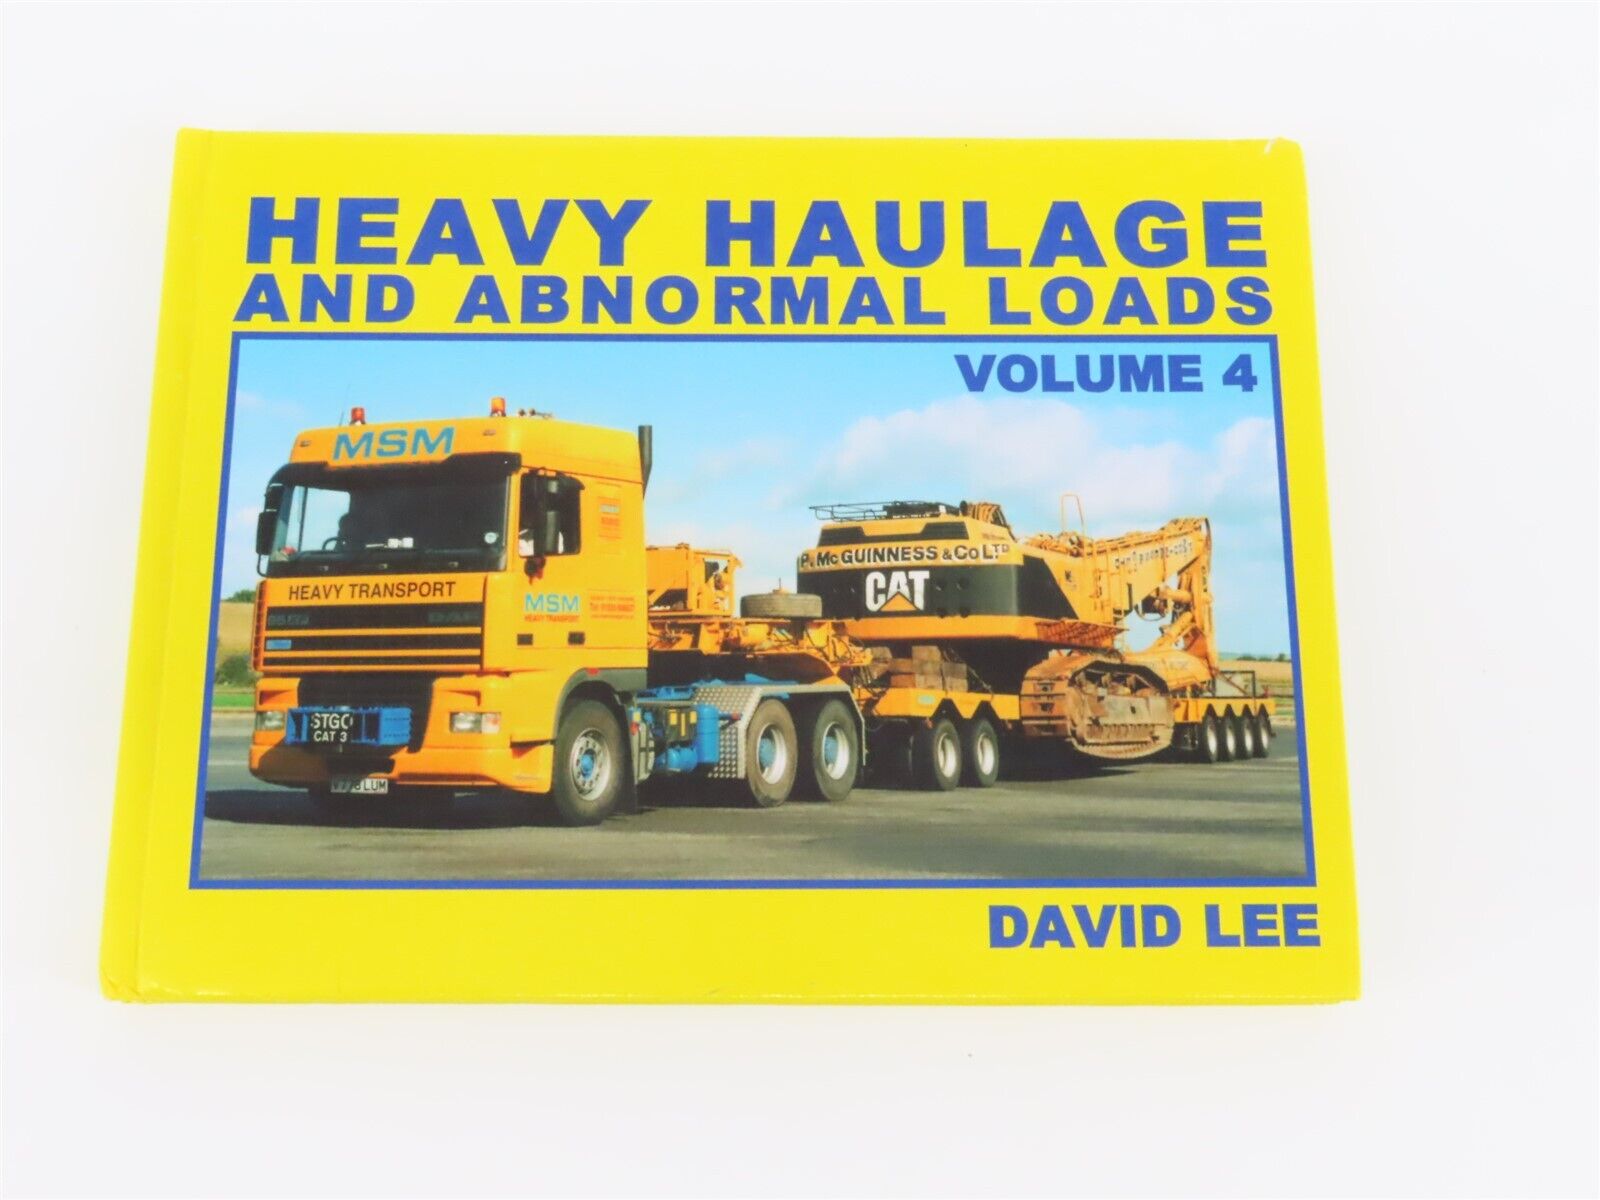 Heavy Haulage And Abnormal Loads Volume 4 by David Lee ©2000 HC Book